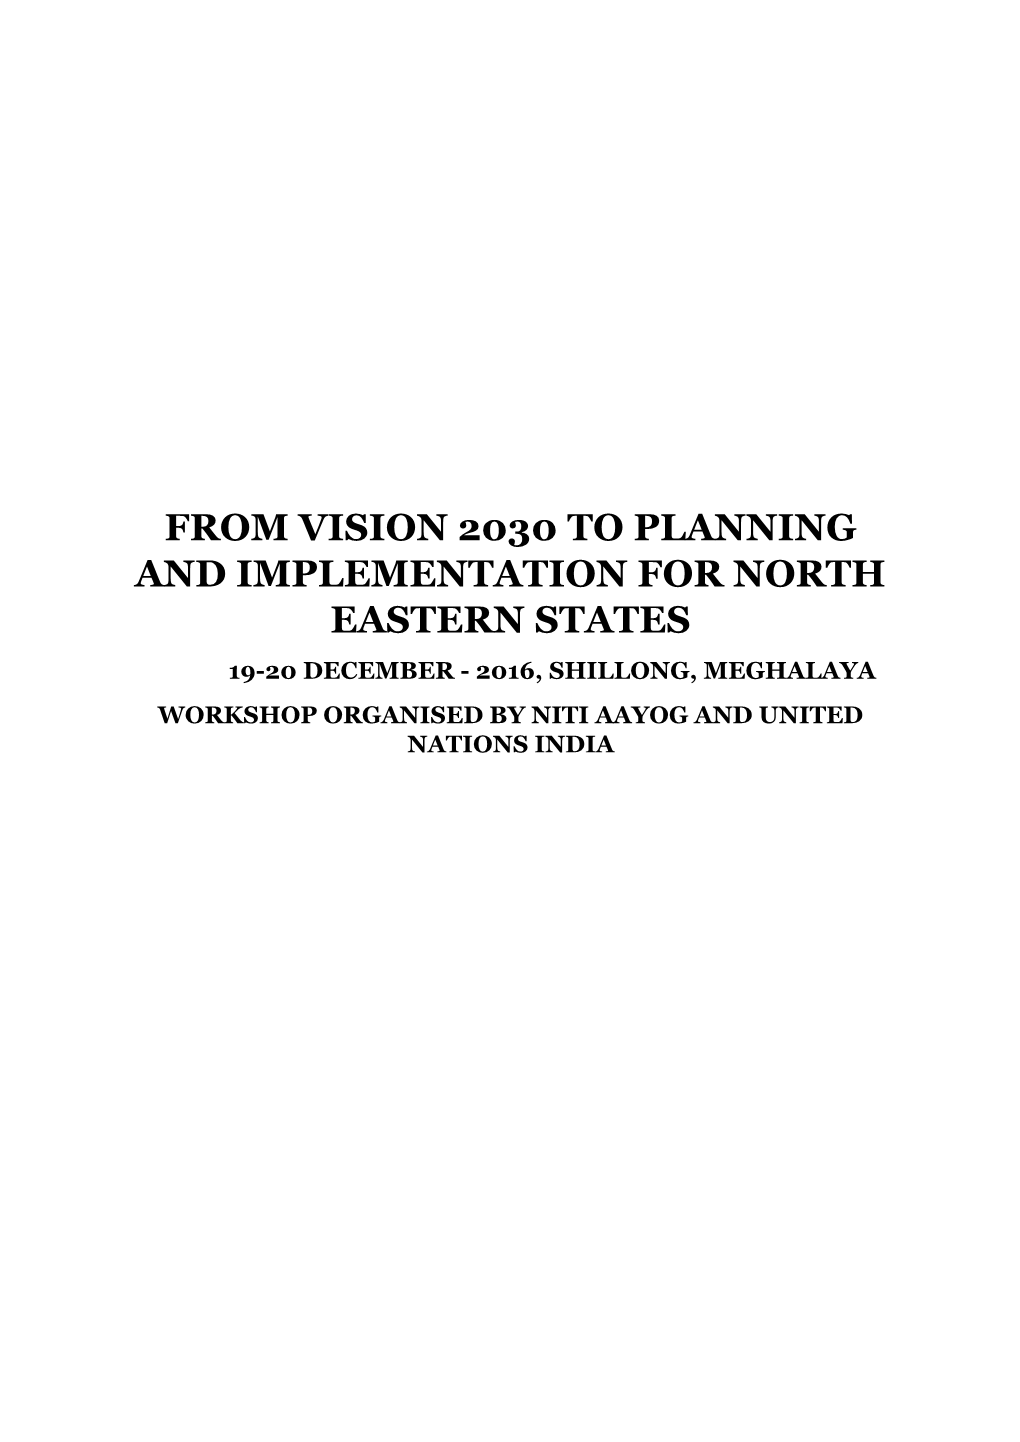 From Vision 2030 to Planning and Implementation for North Eastern States